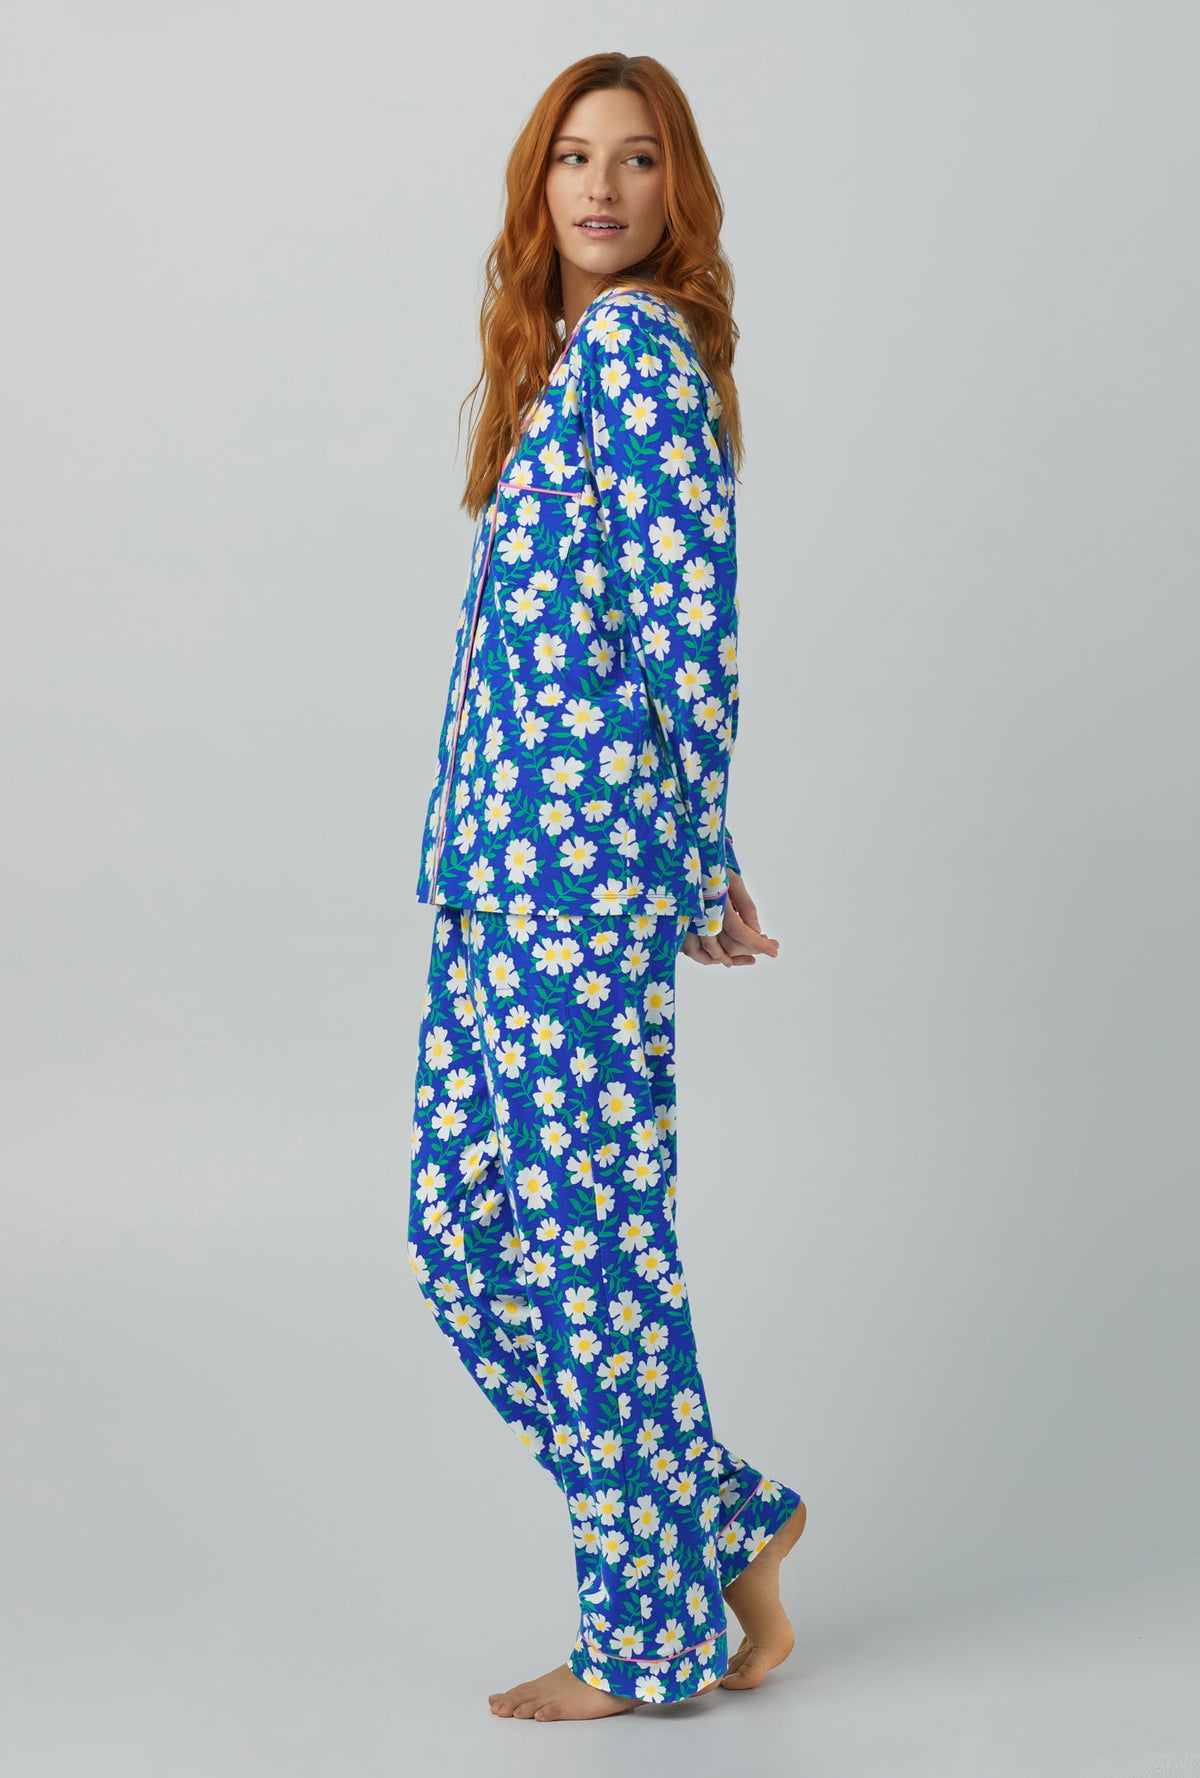 A lady wearing Long Sleeve Classic Stretch Jersey PJ Set with lazy daisy print